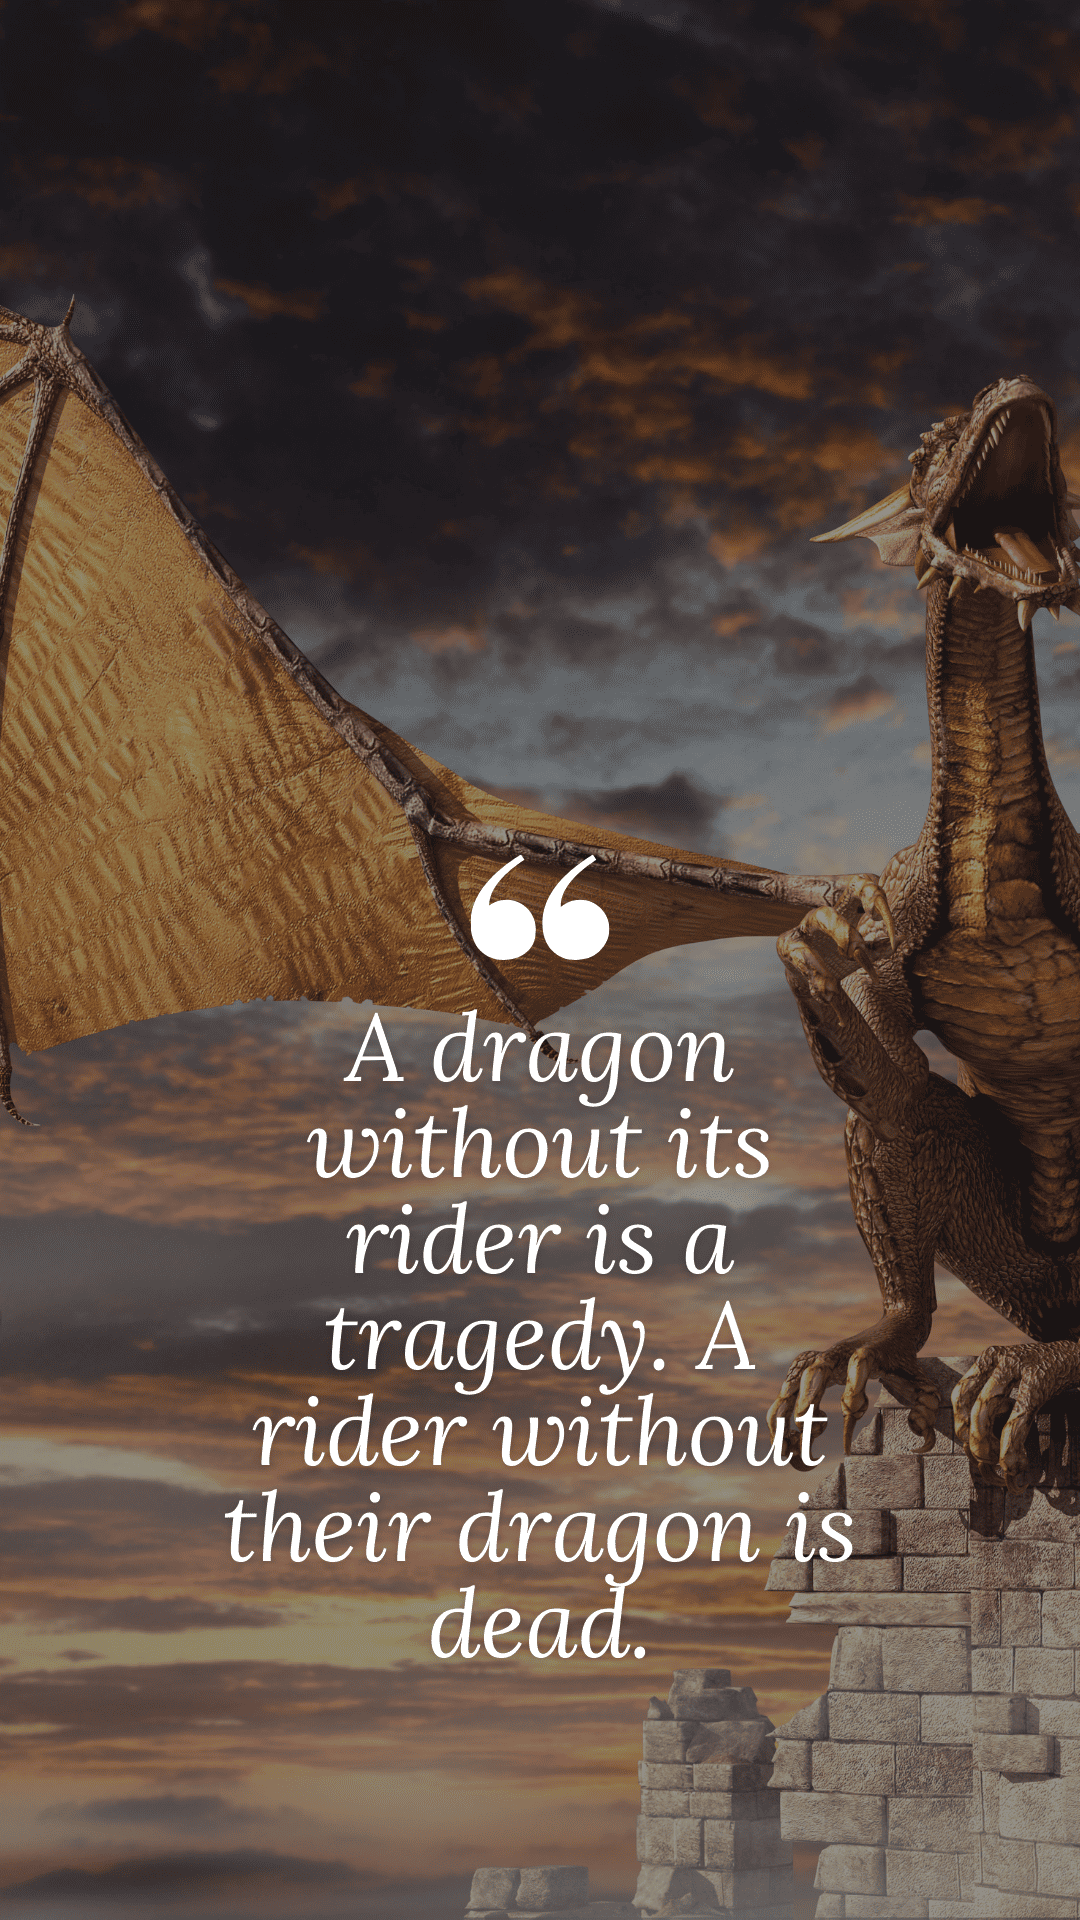 a dragon without its rider is a tragedy. a rider without their dragon is dead.